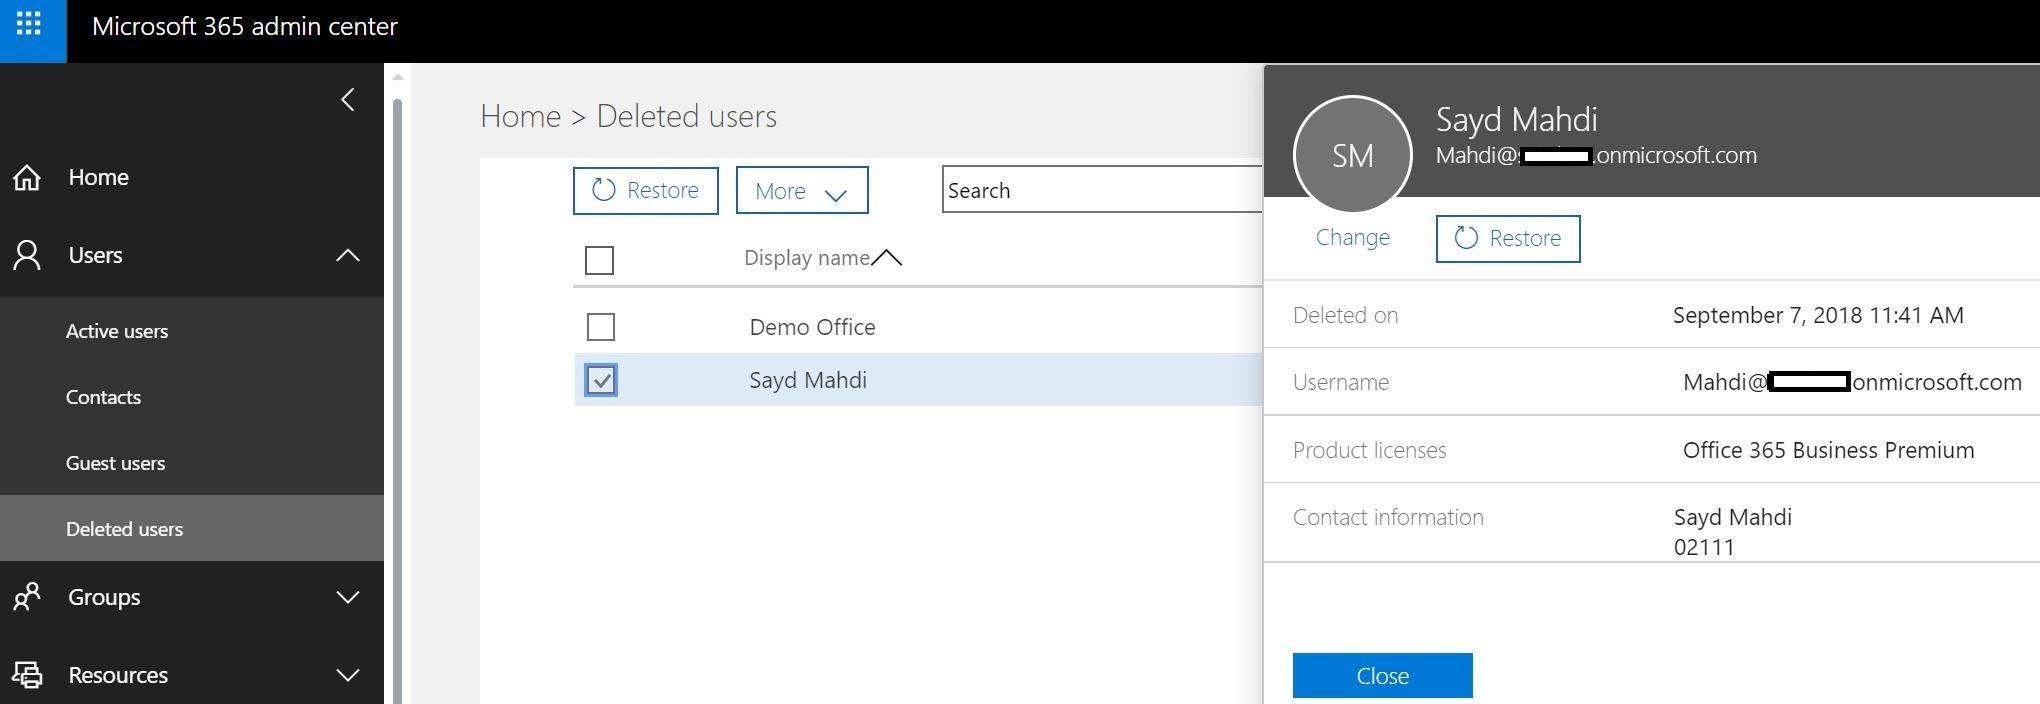 How to Restore Deleted User Account in Office 365 Correctly? - Technig